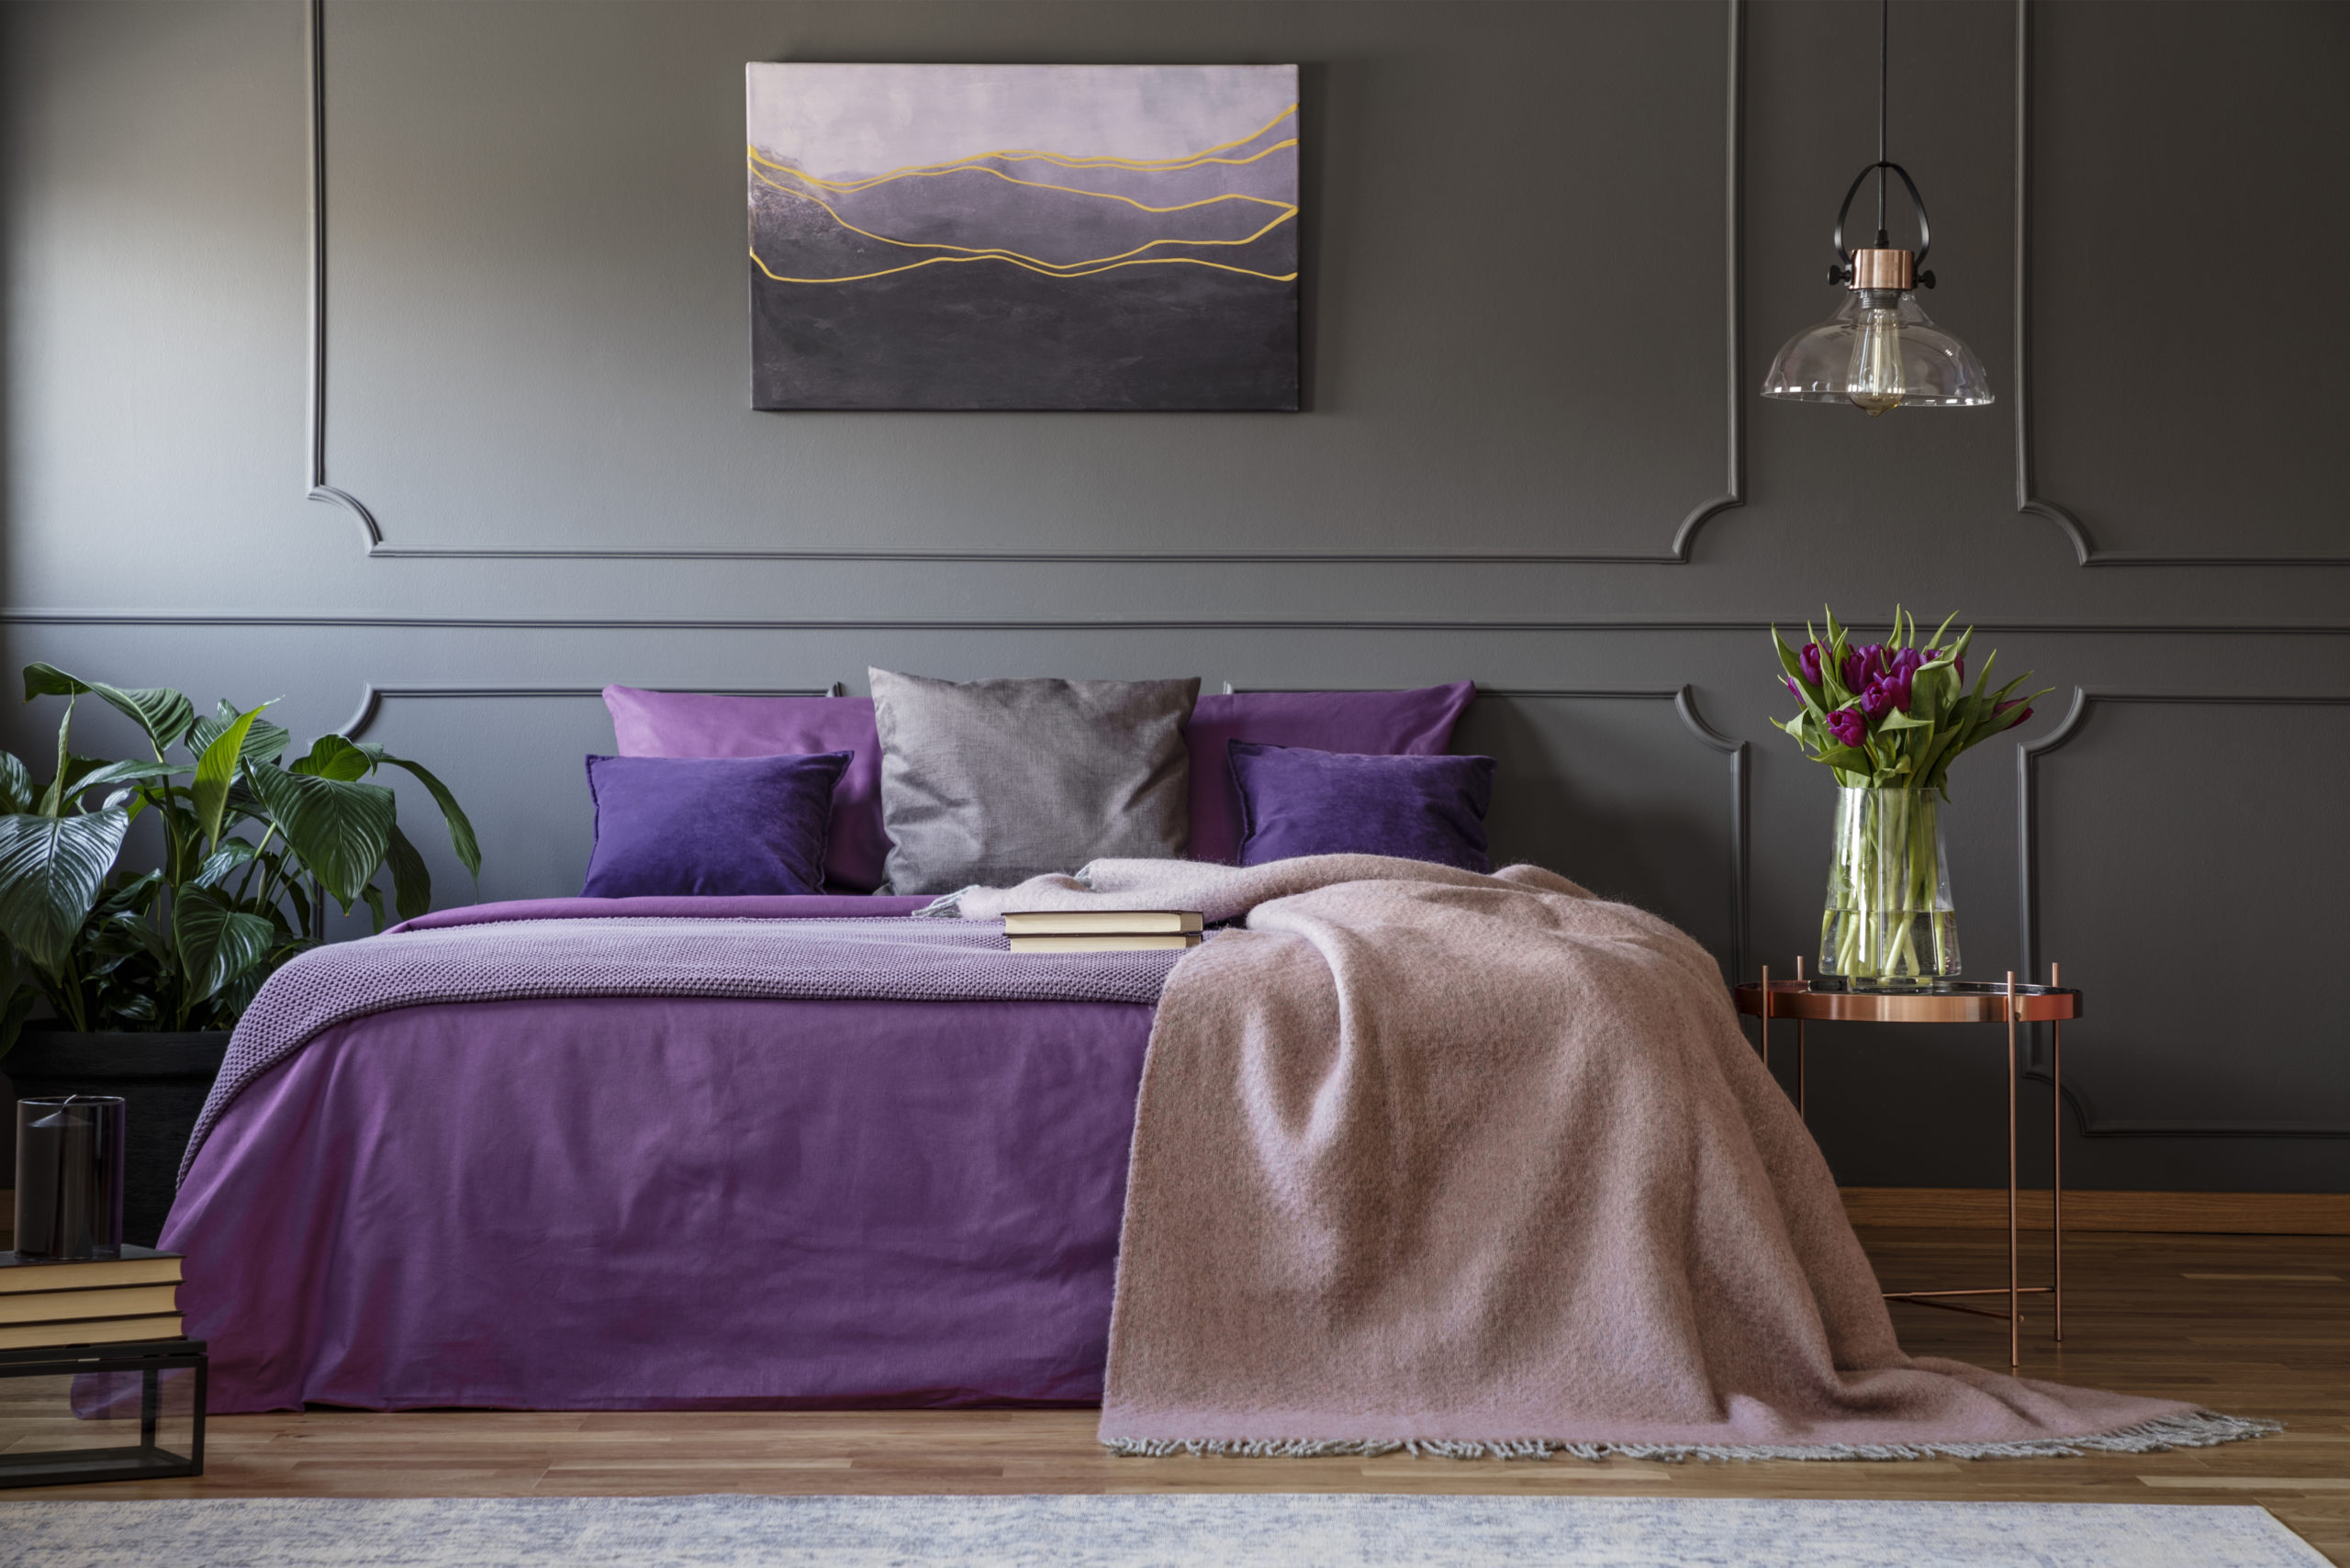 Lamp above copper table with flowers next to bed with violet bedding in purple bedroom interior